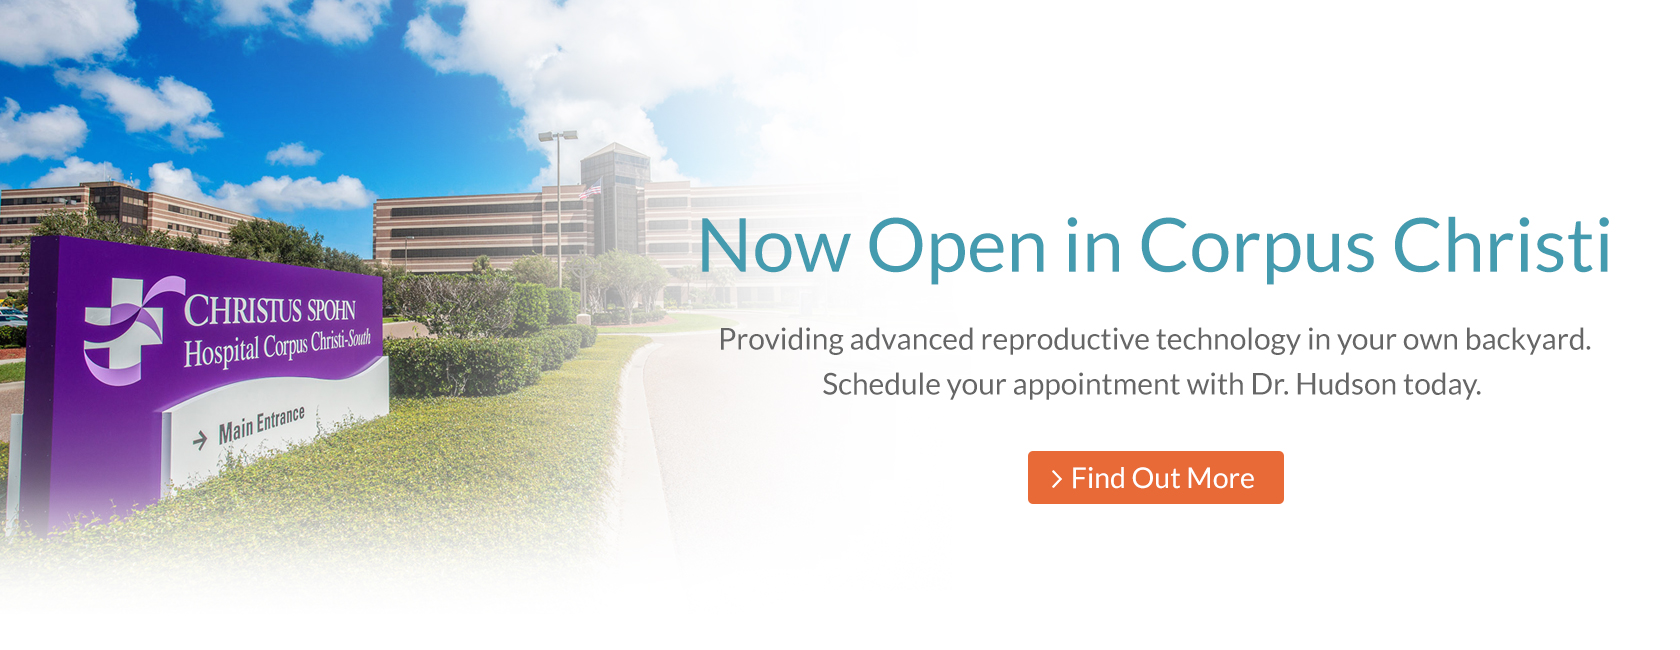 Now Open in Corpus Christi - Providing advanced reproductive technology in your own backyard. Schedule your appointment with Dr. Hudson today.